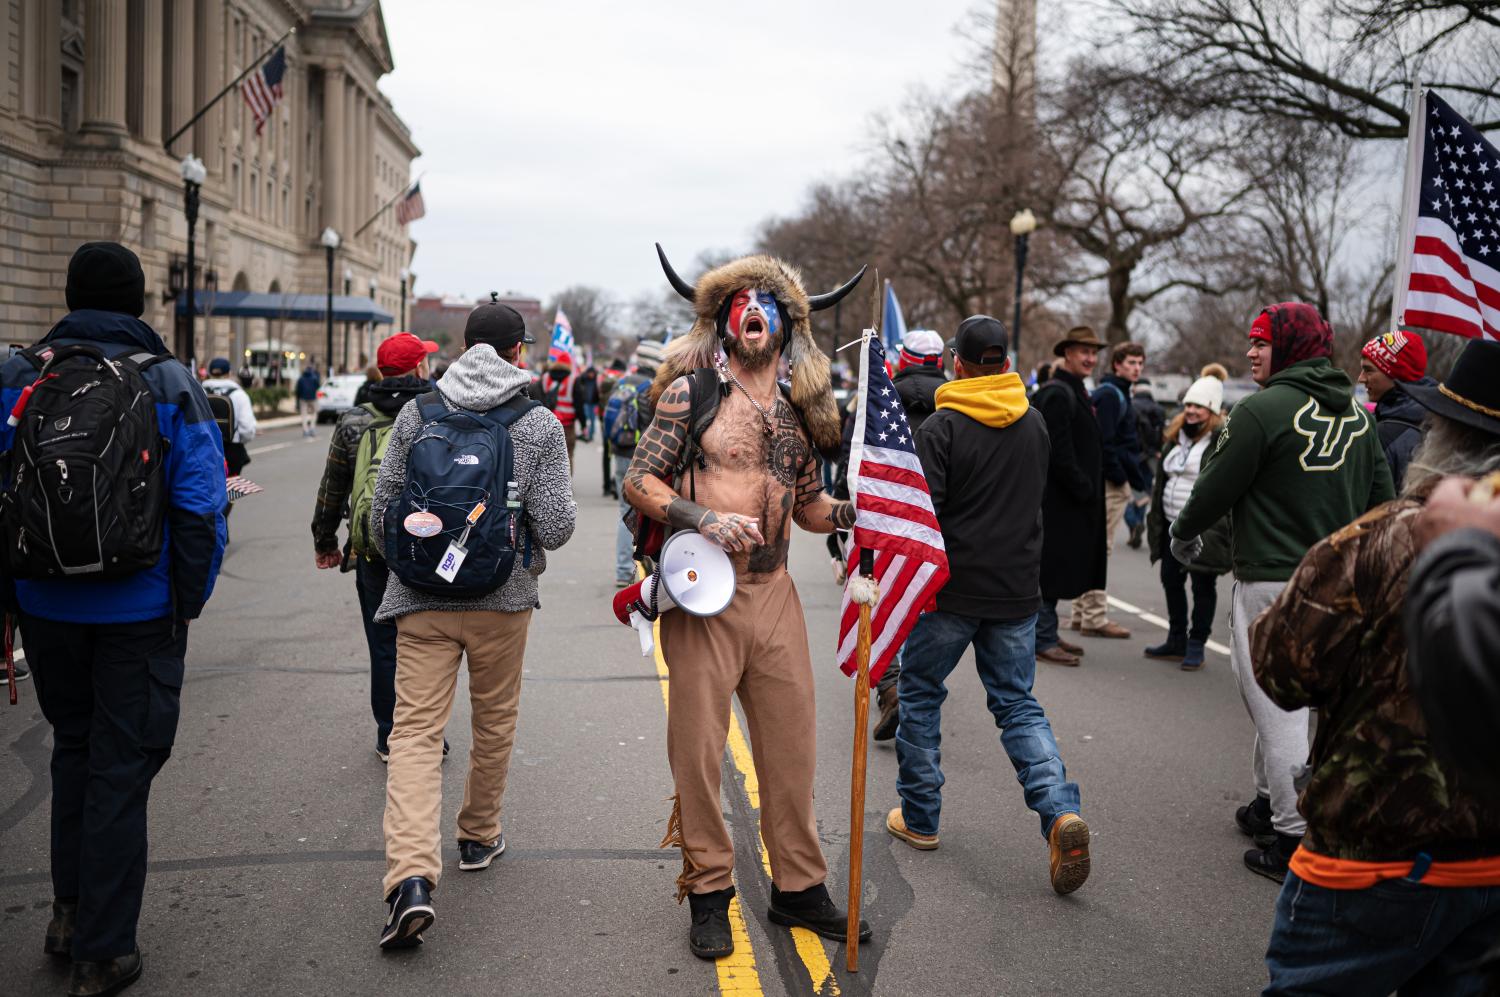 Jake Angeli, a QAnon influencer known as the “Q Shaman”, is seen among pro-Trump supporters during protests in Washington, D.C., on Jan. 6, 2021